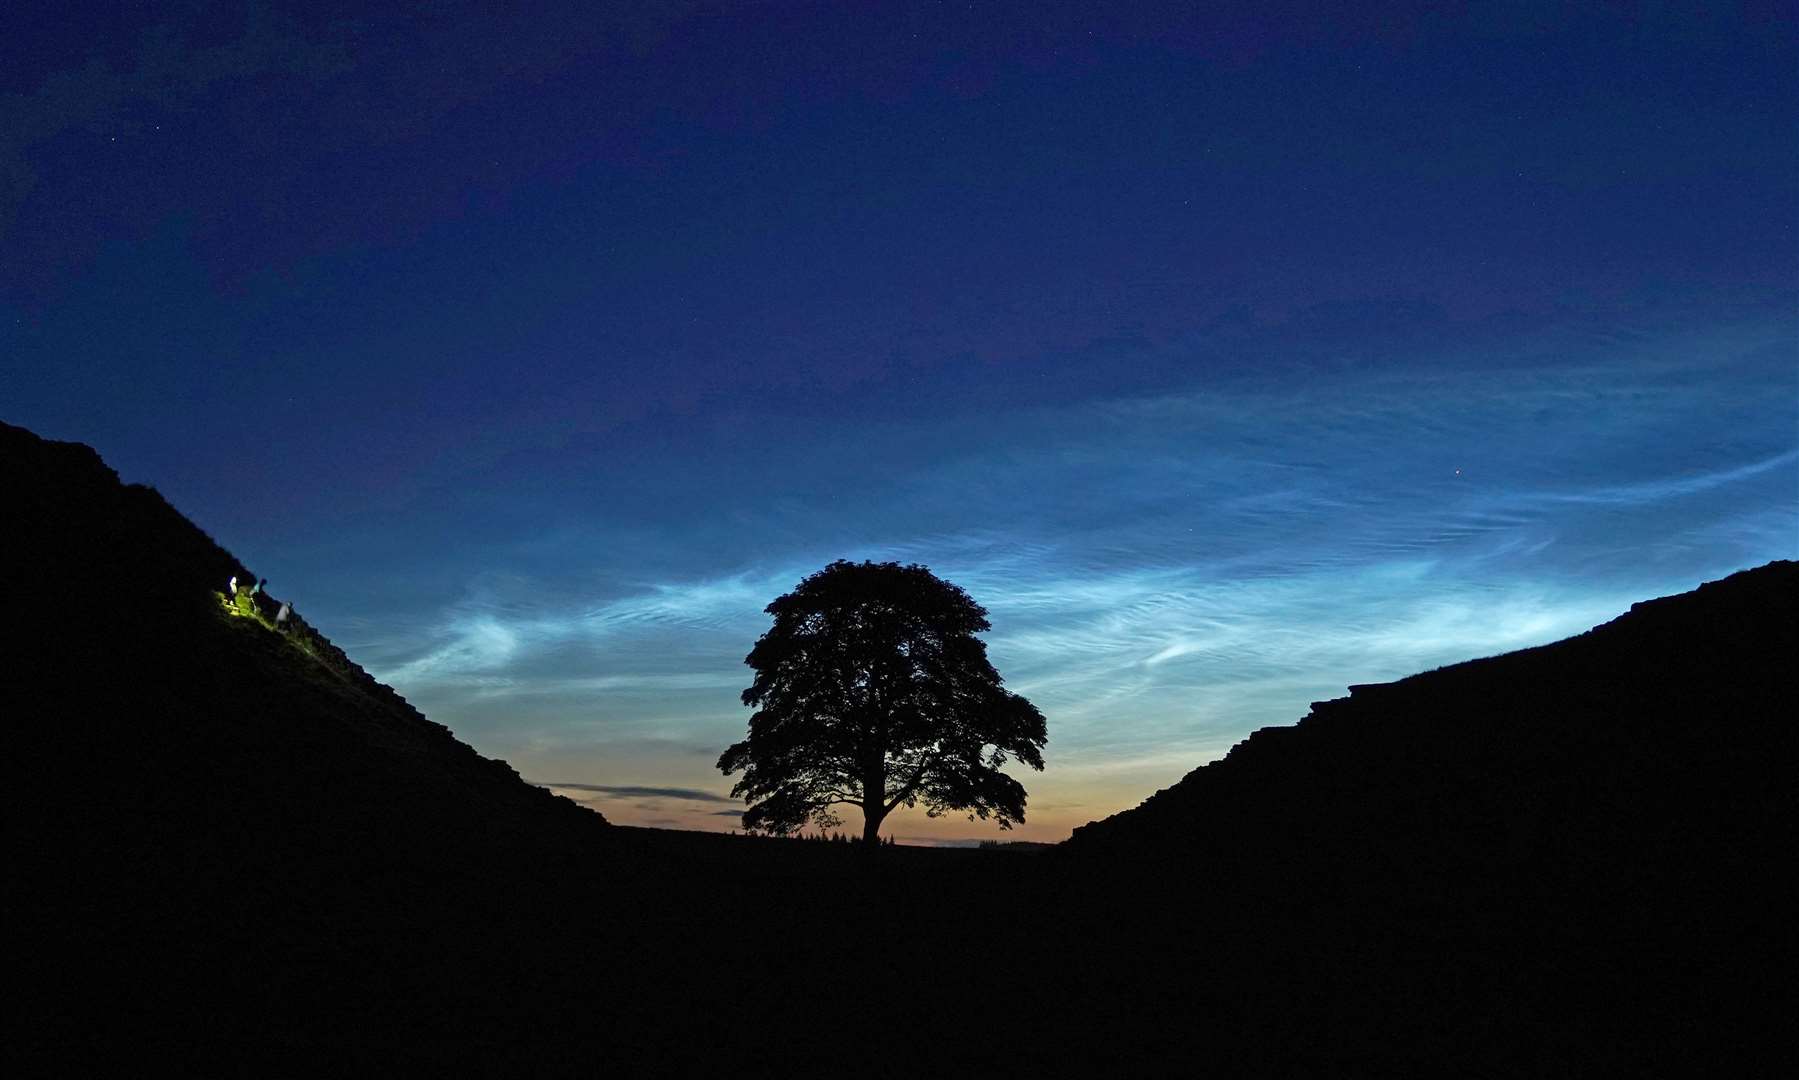 Rare noctilucent clouds appear over the famous Sycamore Gap tree (Owen Humphreys/PA)